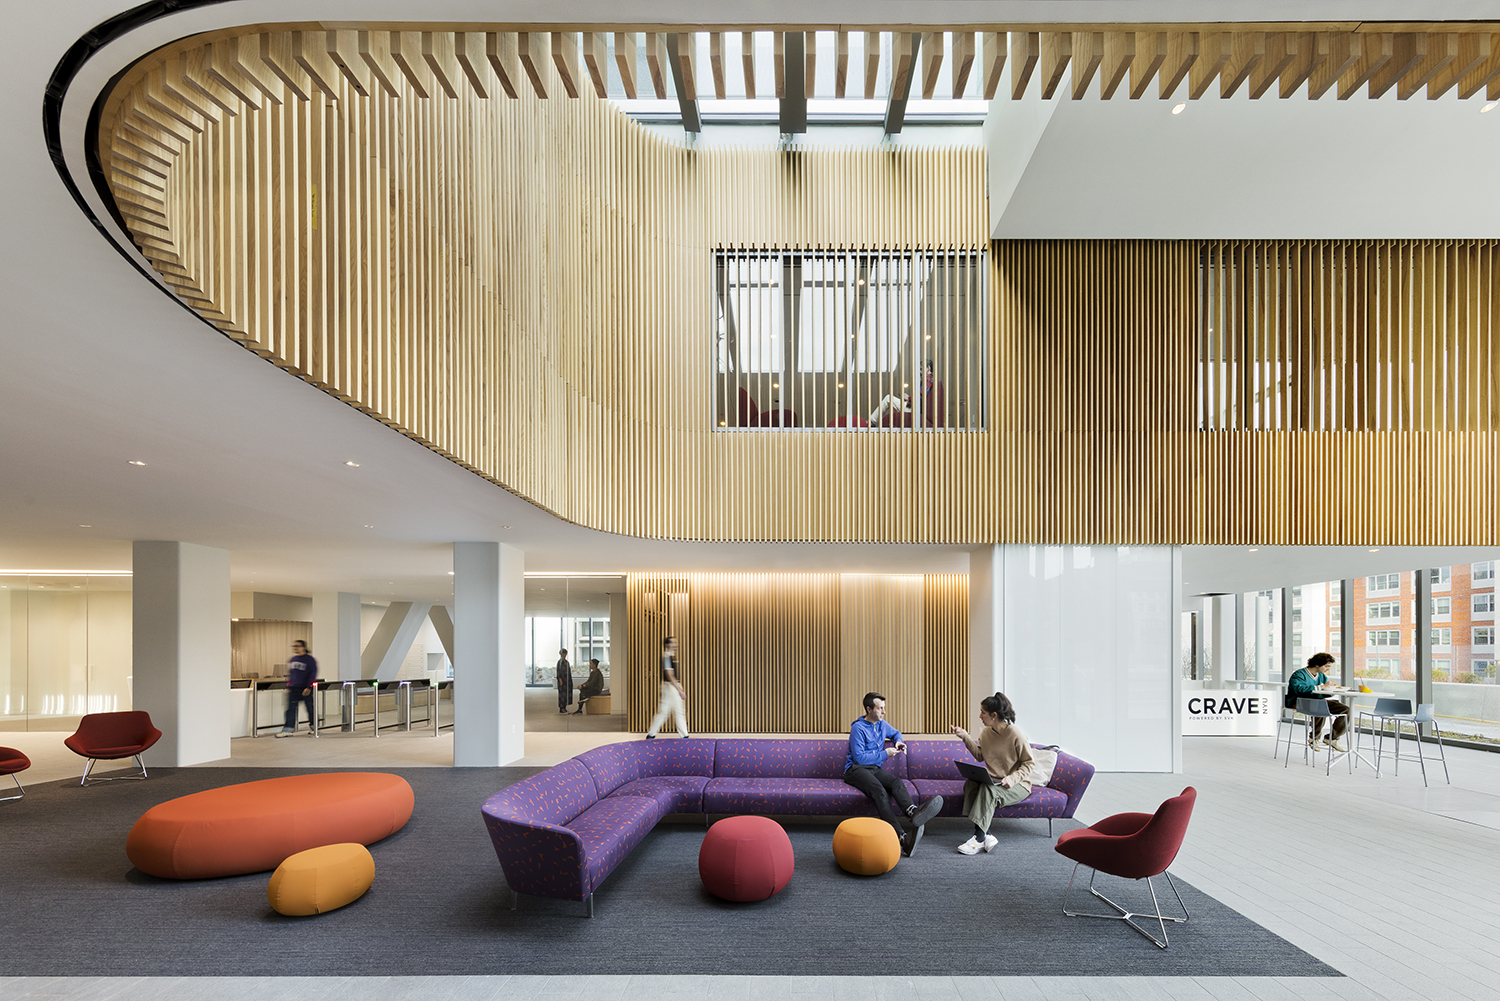 <p>The skylit 6th floor lobby serves as a student social space, providing access to residential living and a café. <small>&copy; Connie Zhou / JBSA </small></p>